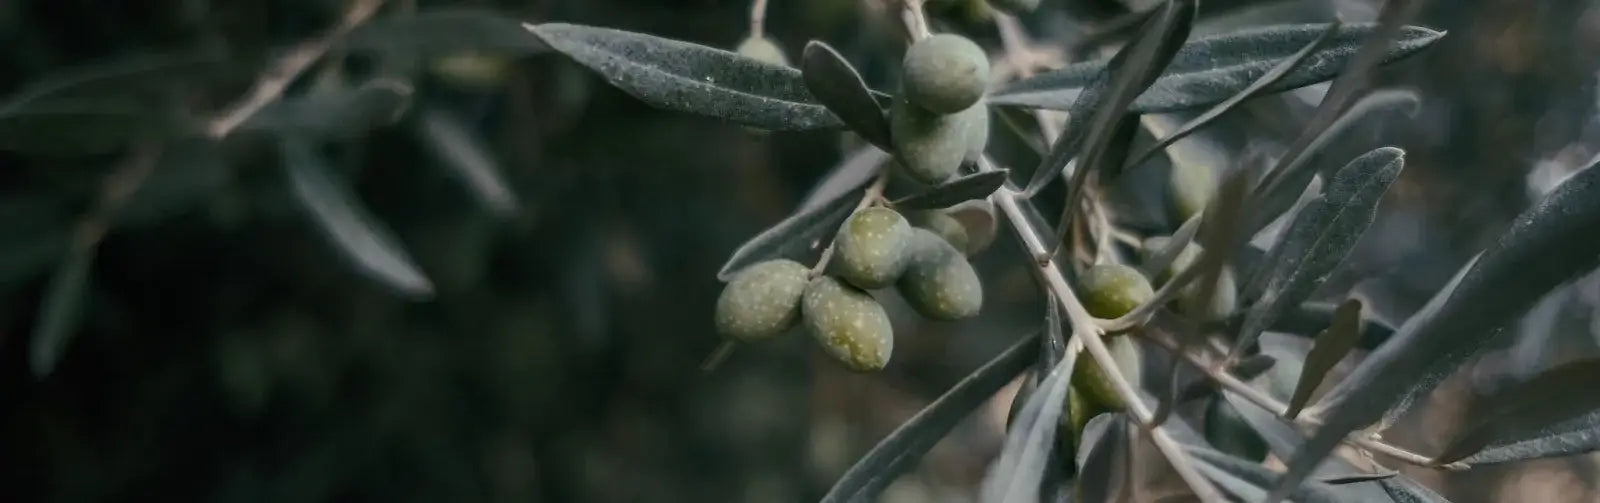 Olive branches used to make olive tanned leather